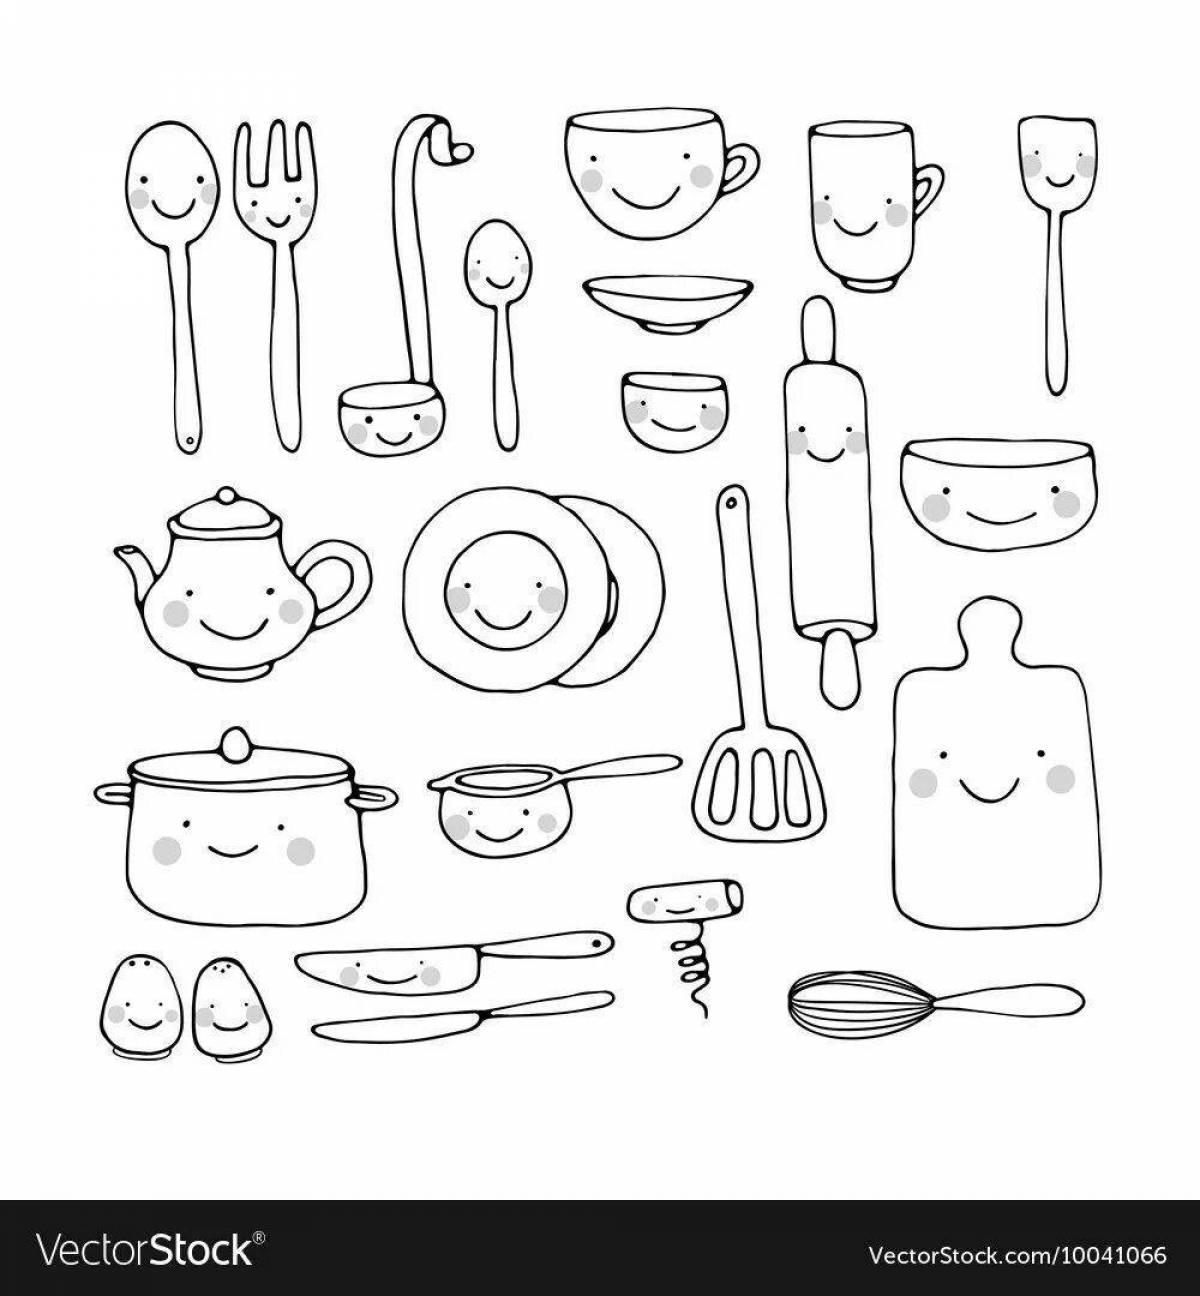 Dishes and food #3